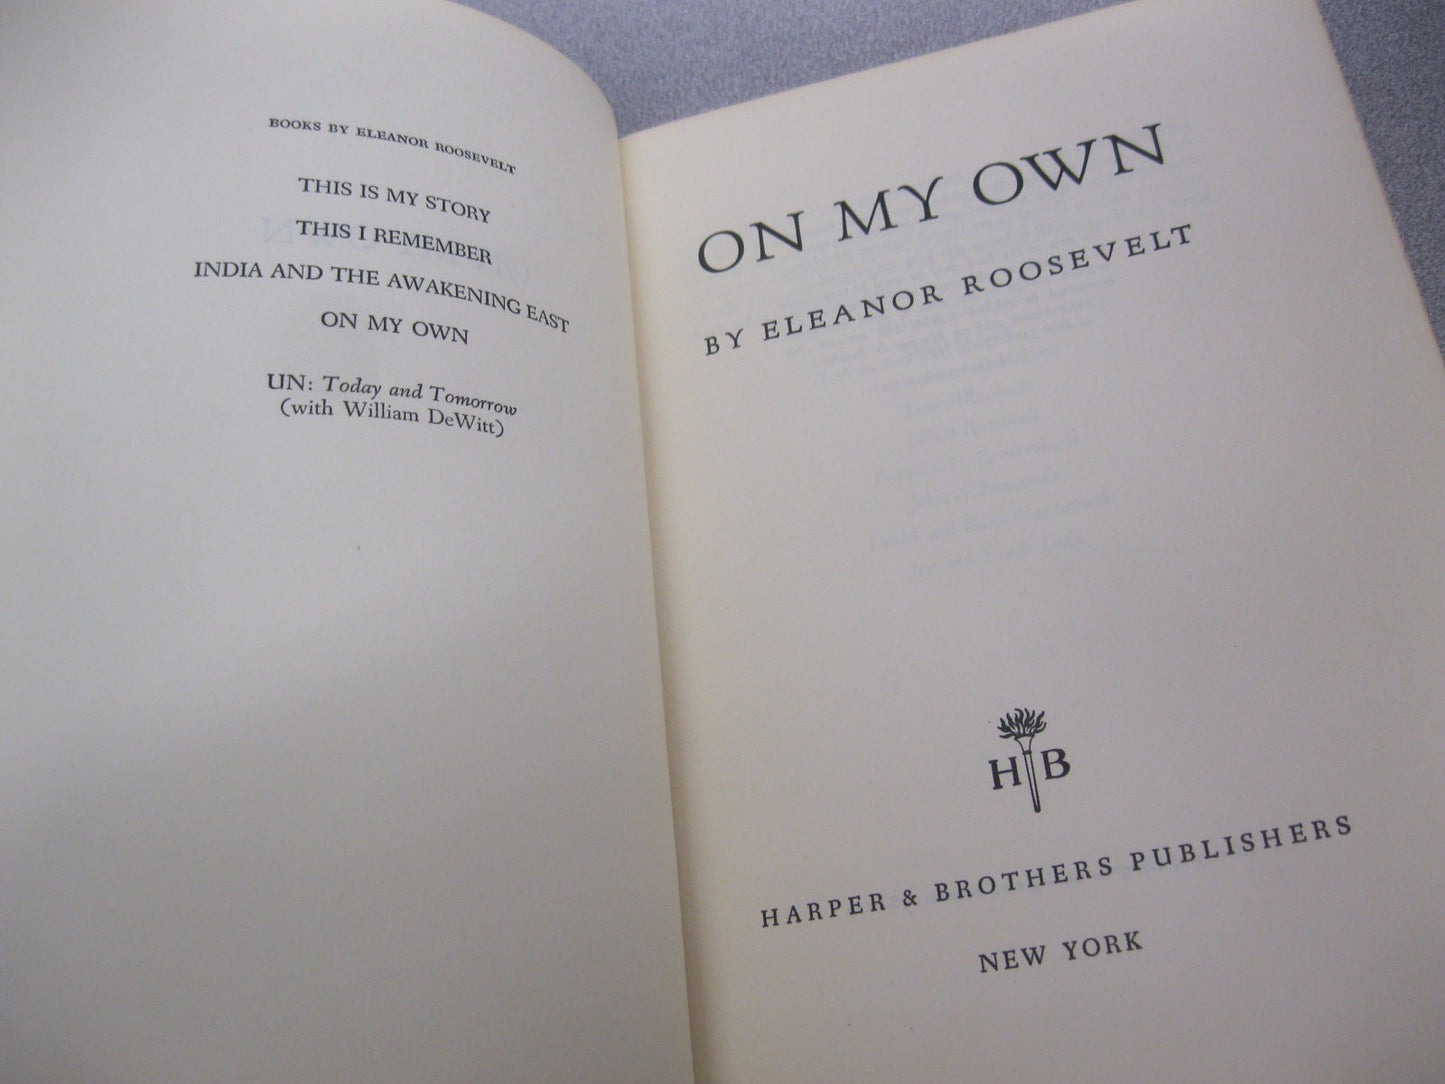 On My Own by Eleanor Roosevelt